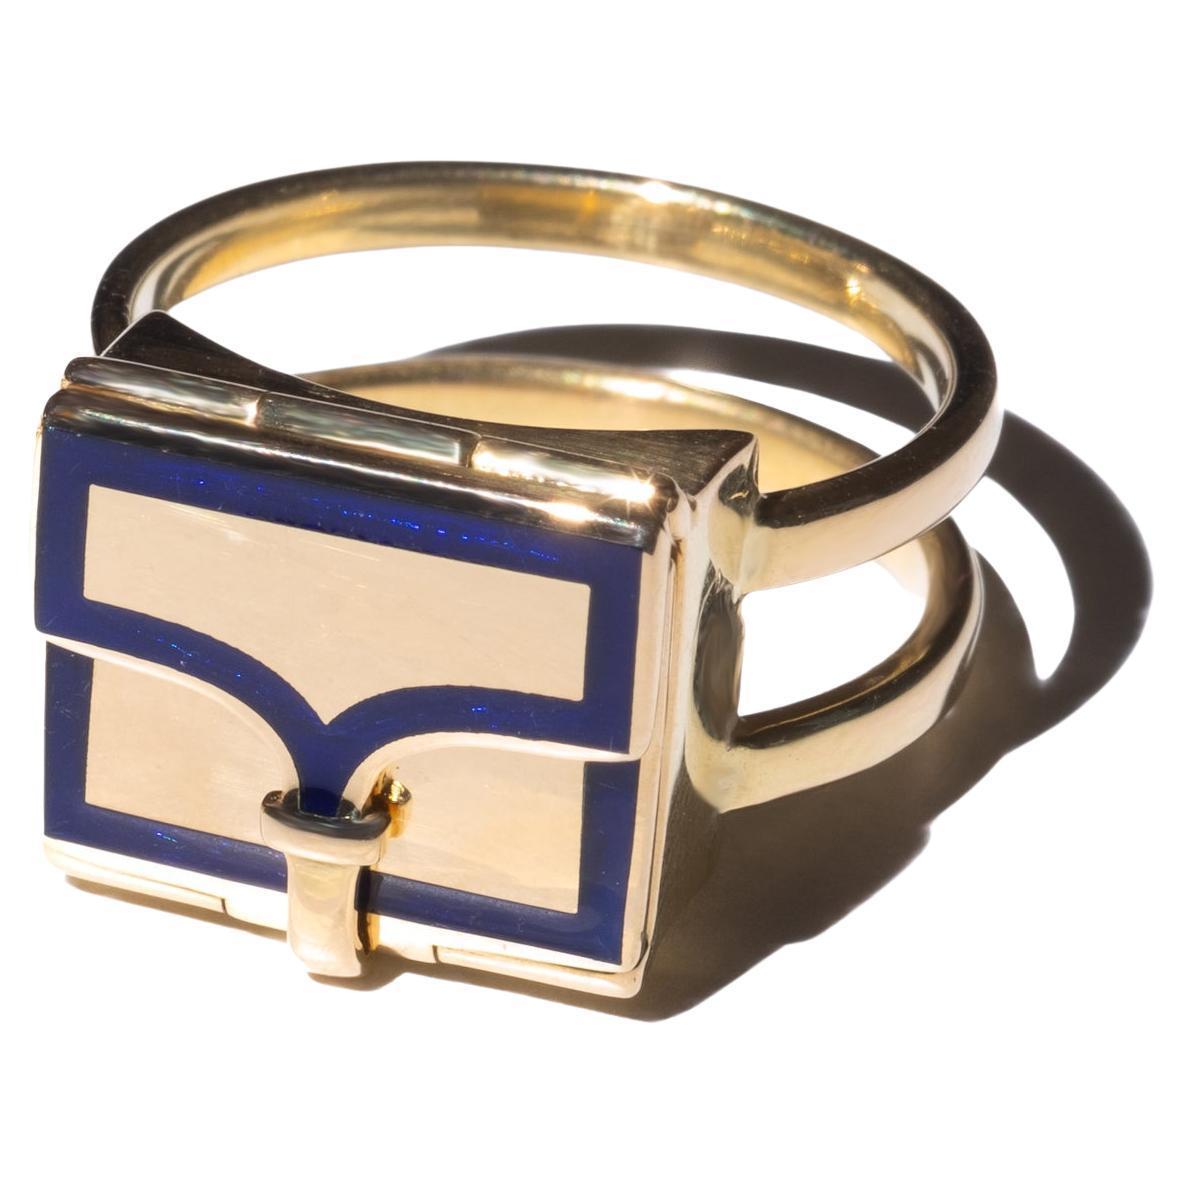 The Fleur Fairfax Book Ring in 18ct Gold and Enamel - Sapphire Blue US 6.75